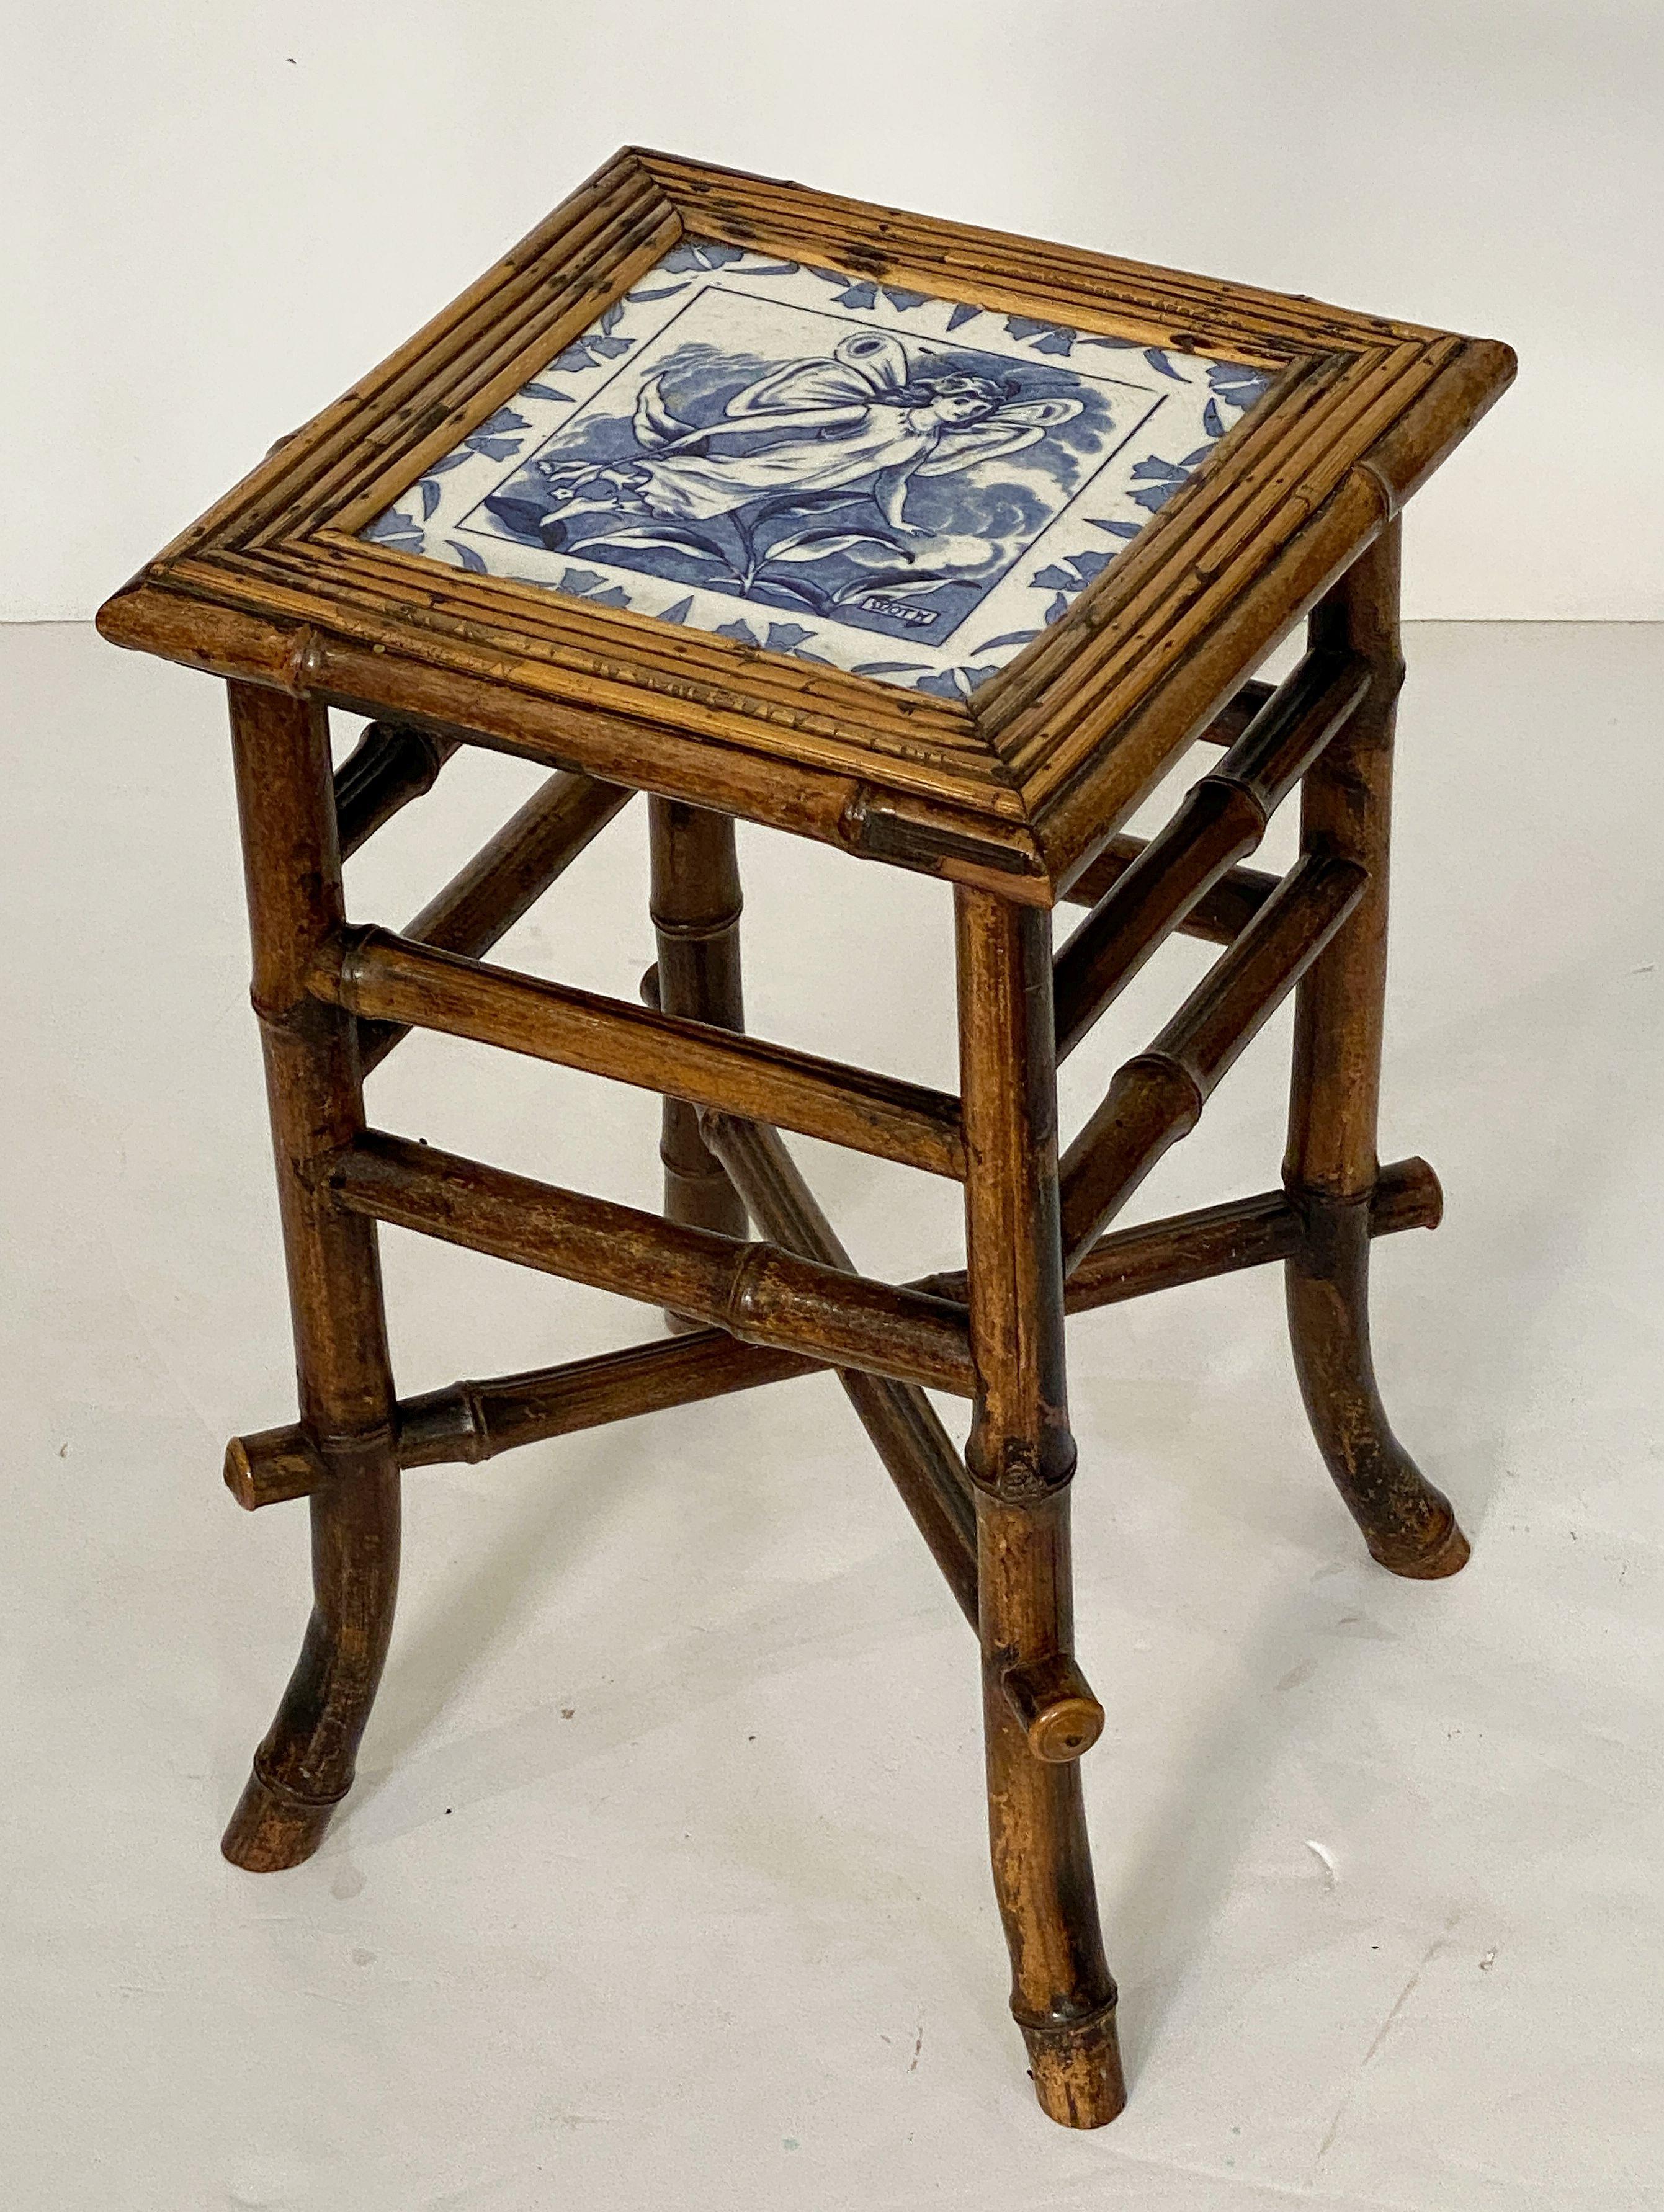 English Bamboo Table or Stool with Tile Seat from the Aesthetic Movement Era In Good Condition For Sale In Austin, TX